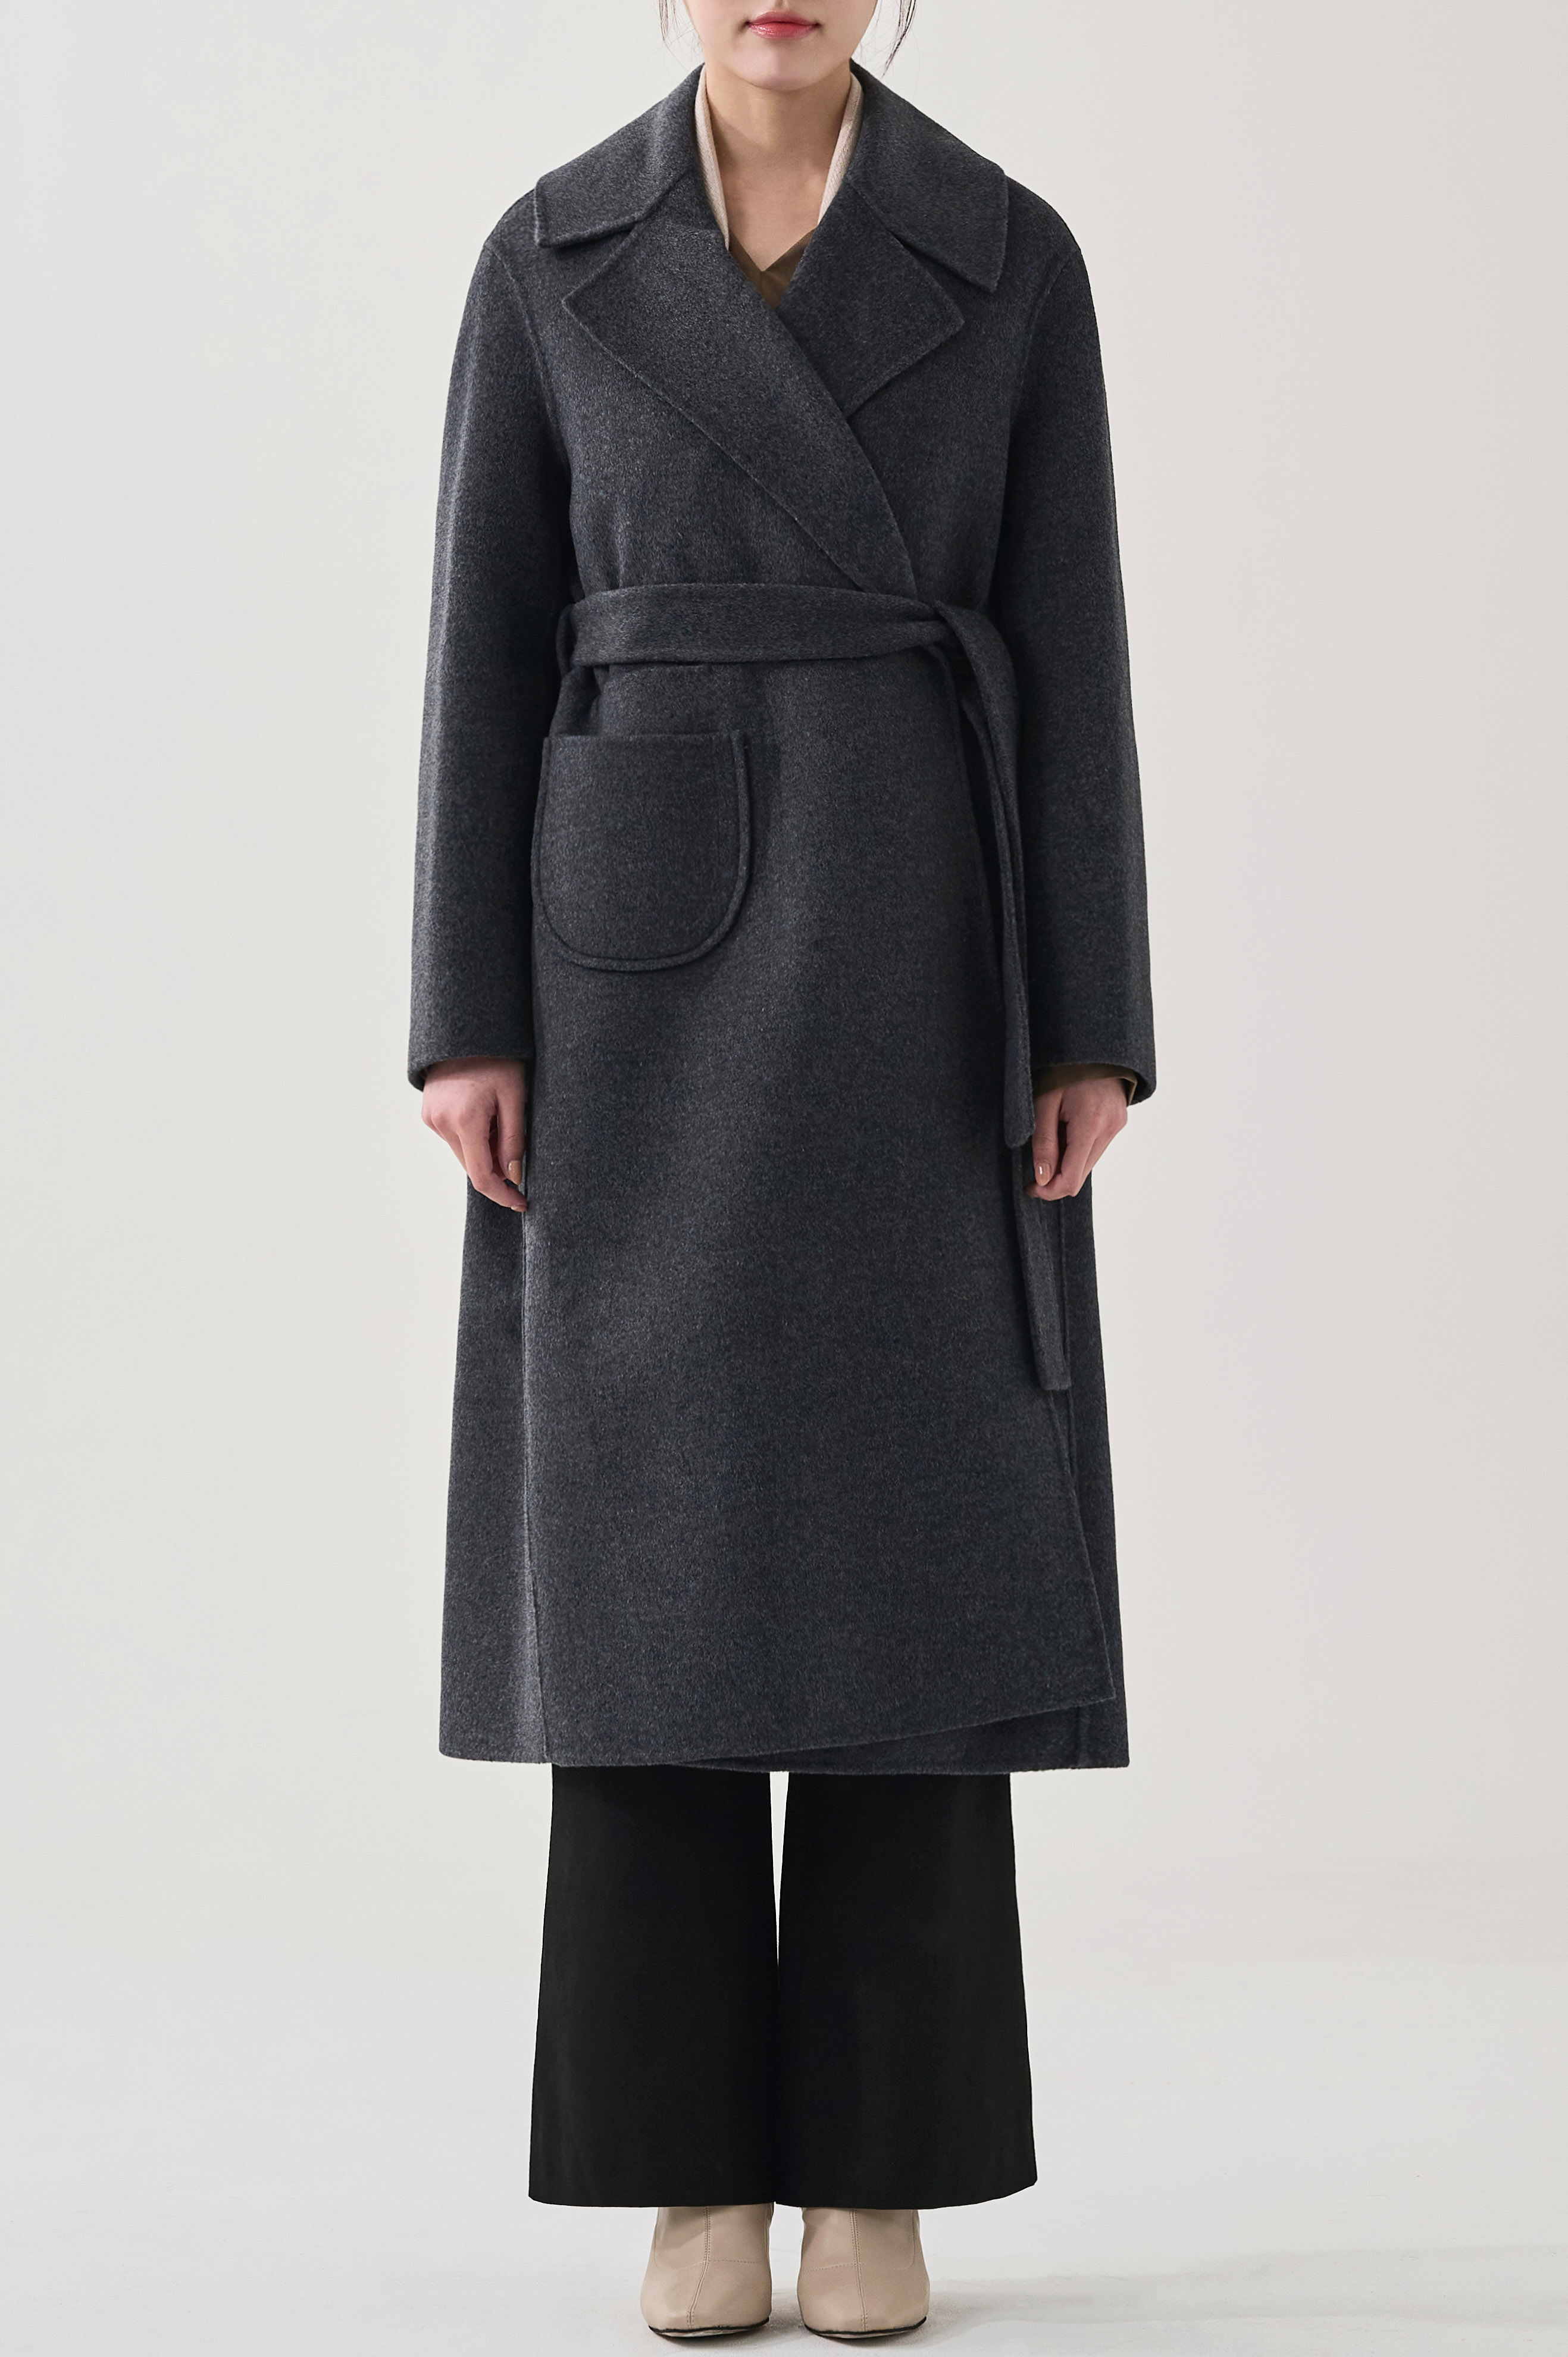 BELTED DOUBLE-FACED WOOL COAT-charcoal, 혜영킴, HYEYEONG KIM designer brand